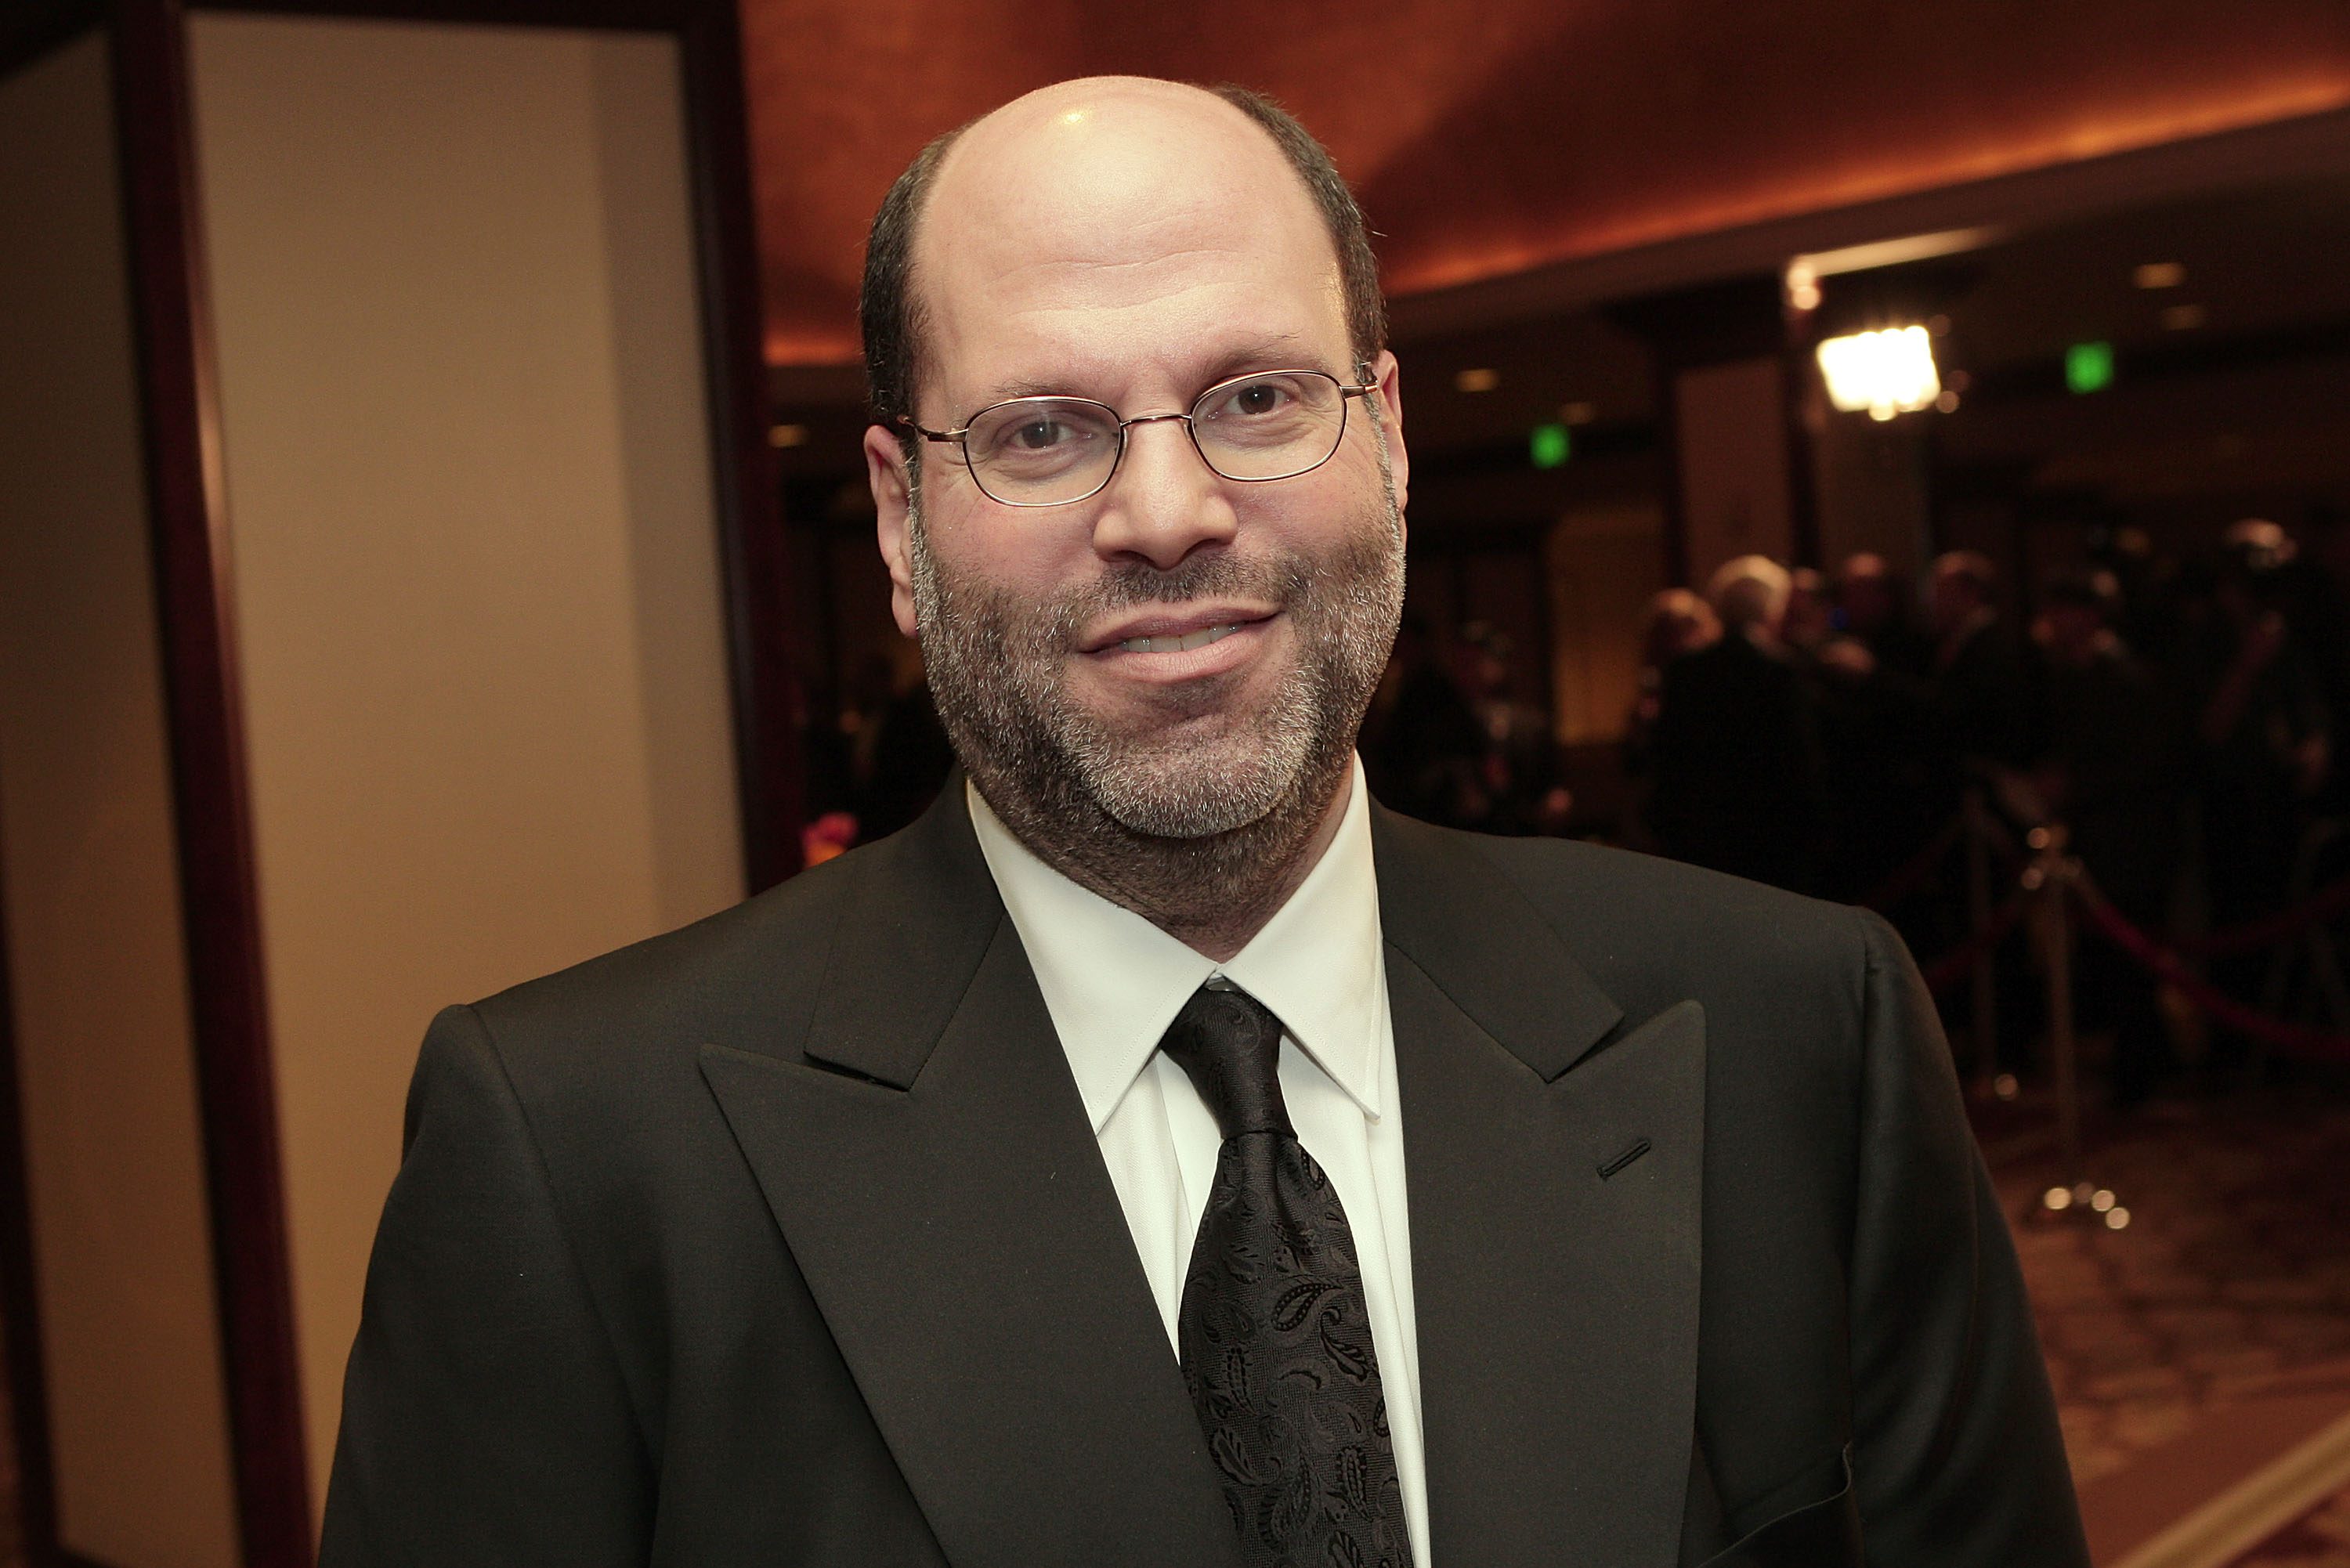 Film and theater producer Scott Rudin arrives at the 60th annual DGA Awards held at the Hyatt Regency Century Plaza Hotel on January 26, 2008 in Los Angeles, California.